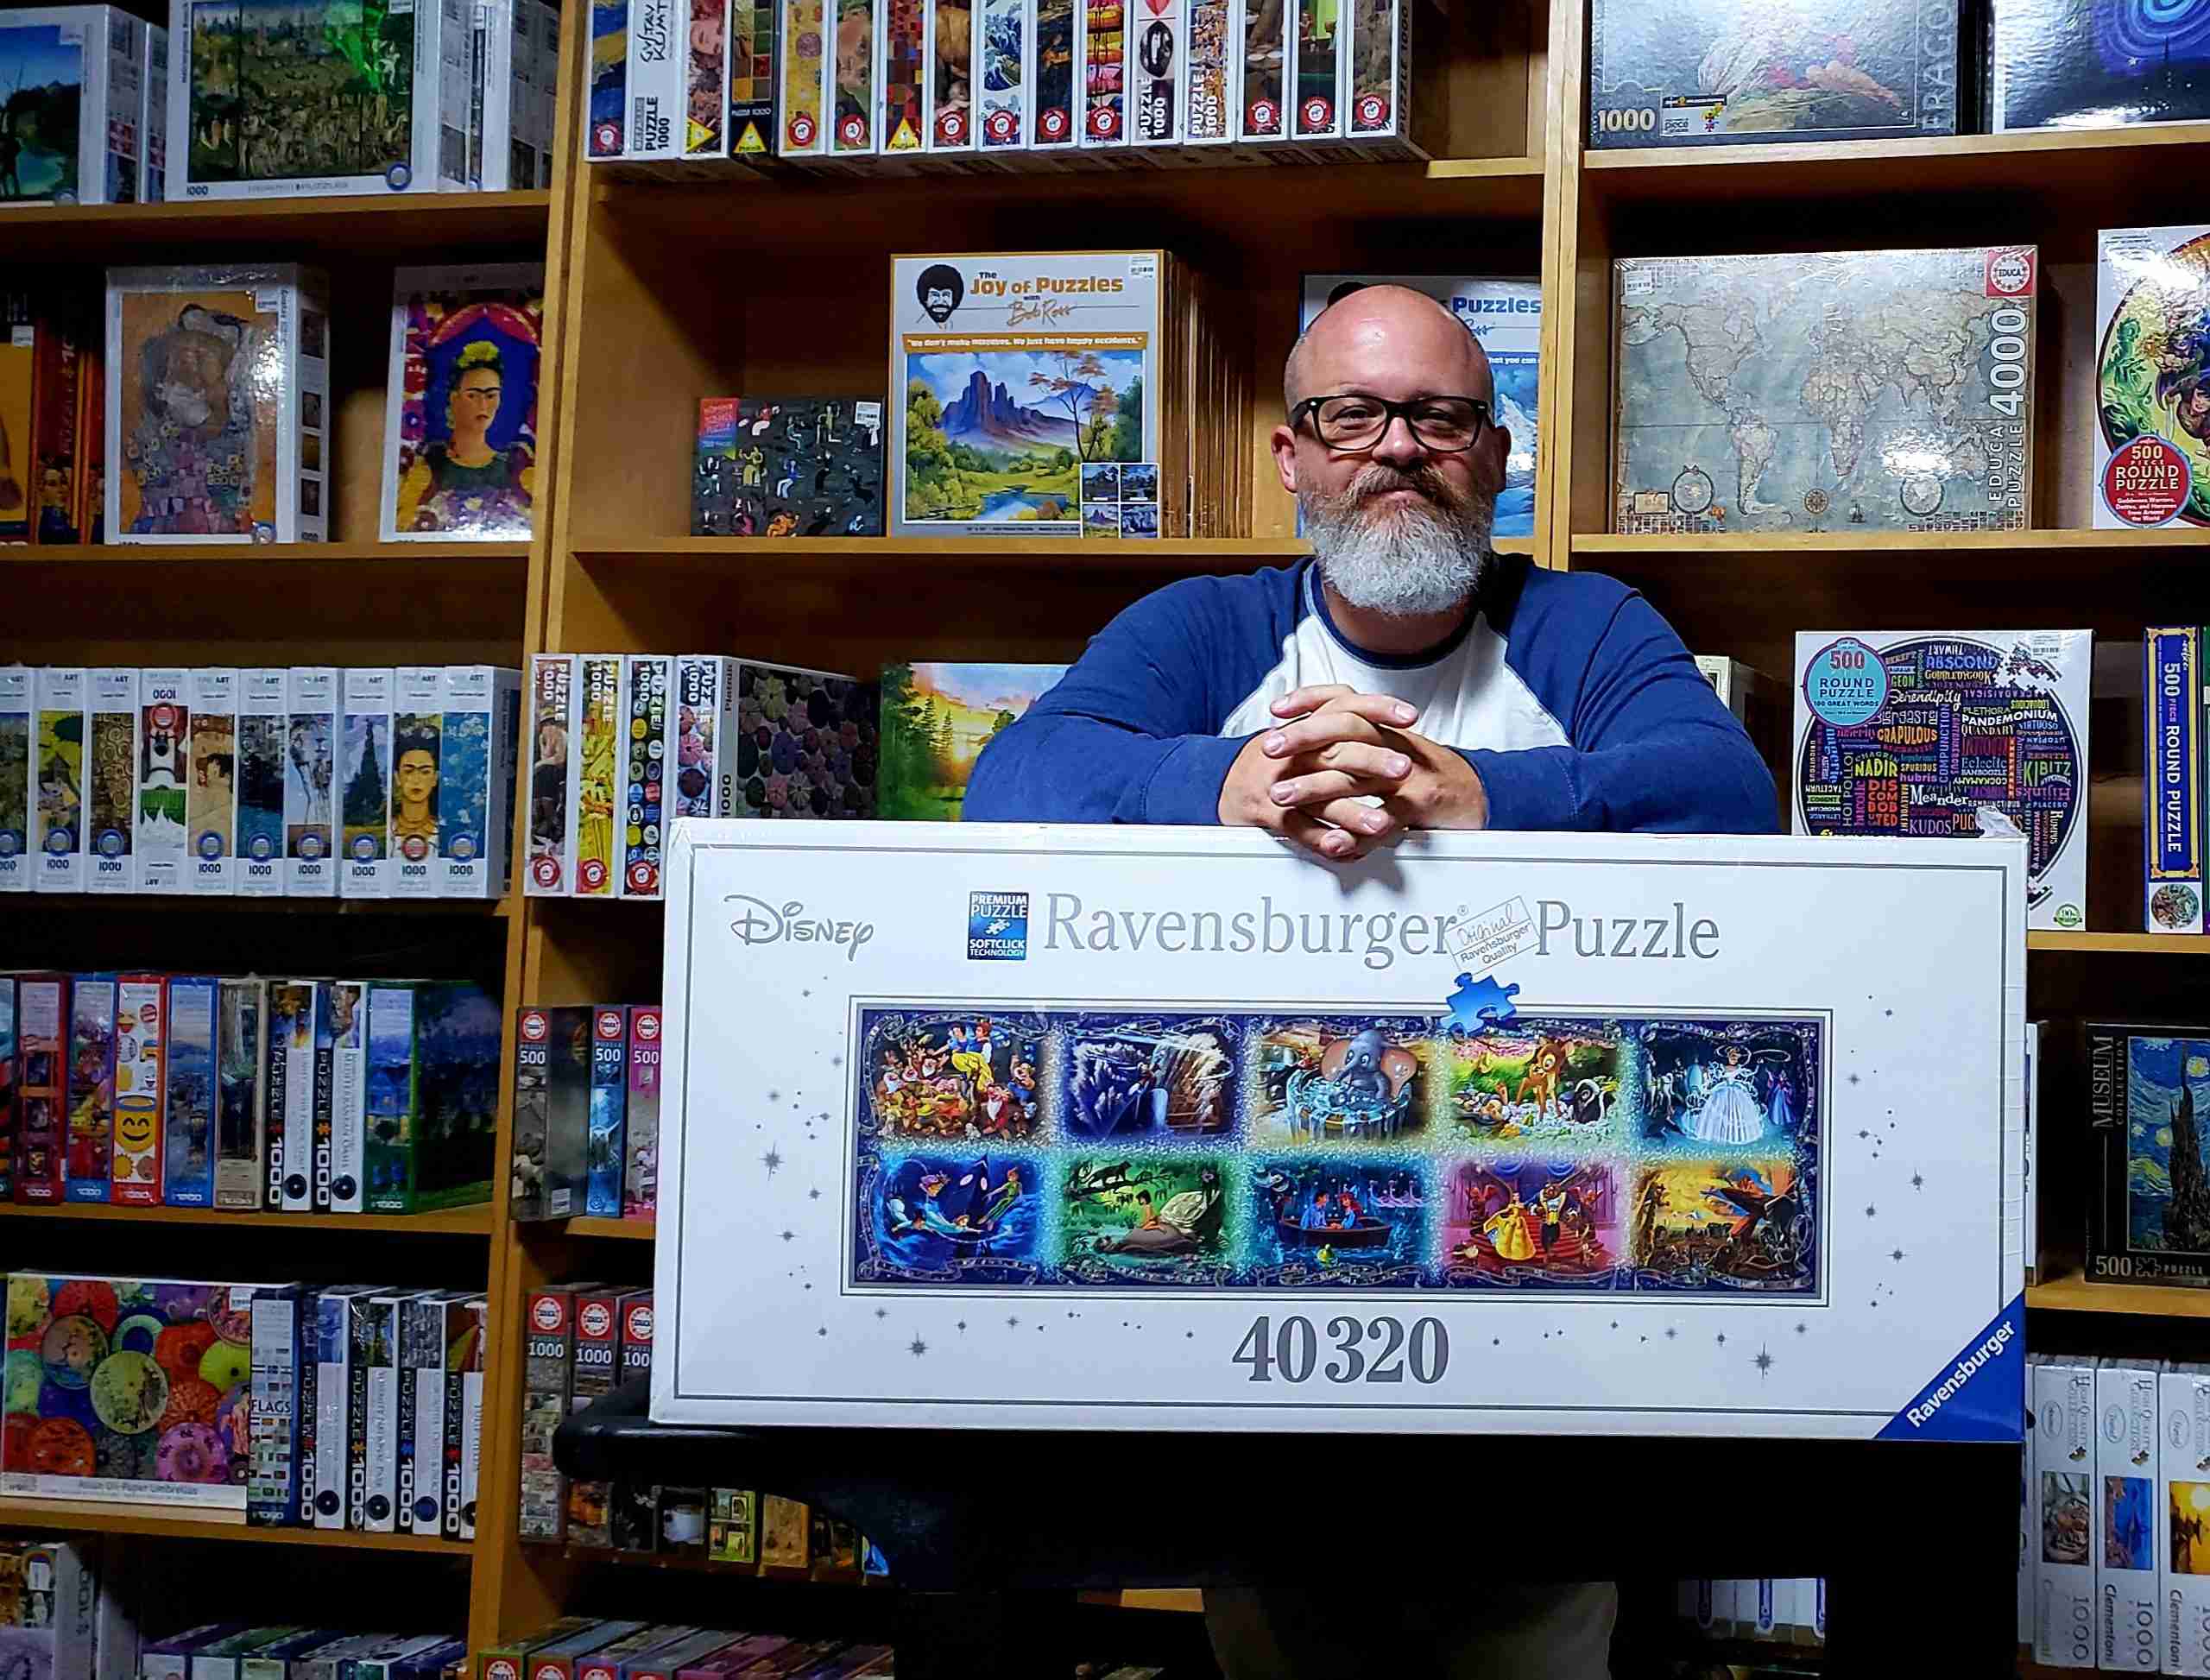 What’s Gaining  in Games  The Sale of Games and Puzzles  at Toy and Game Stores